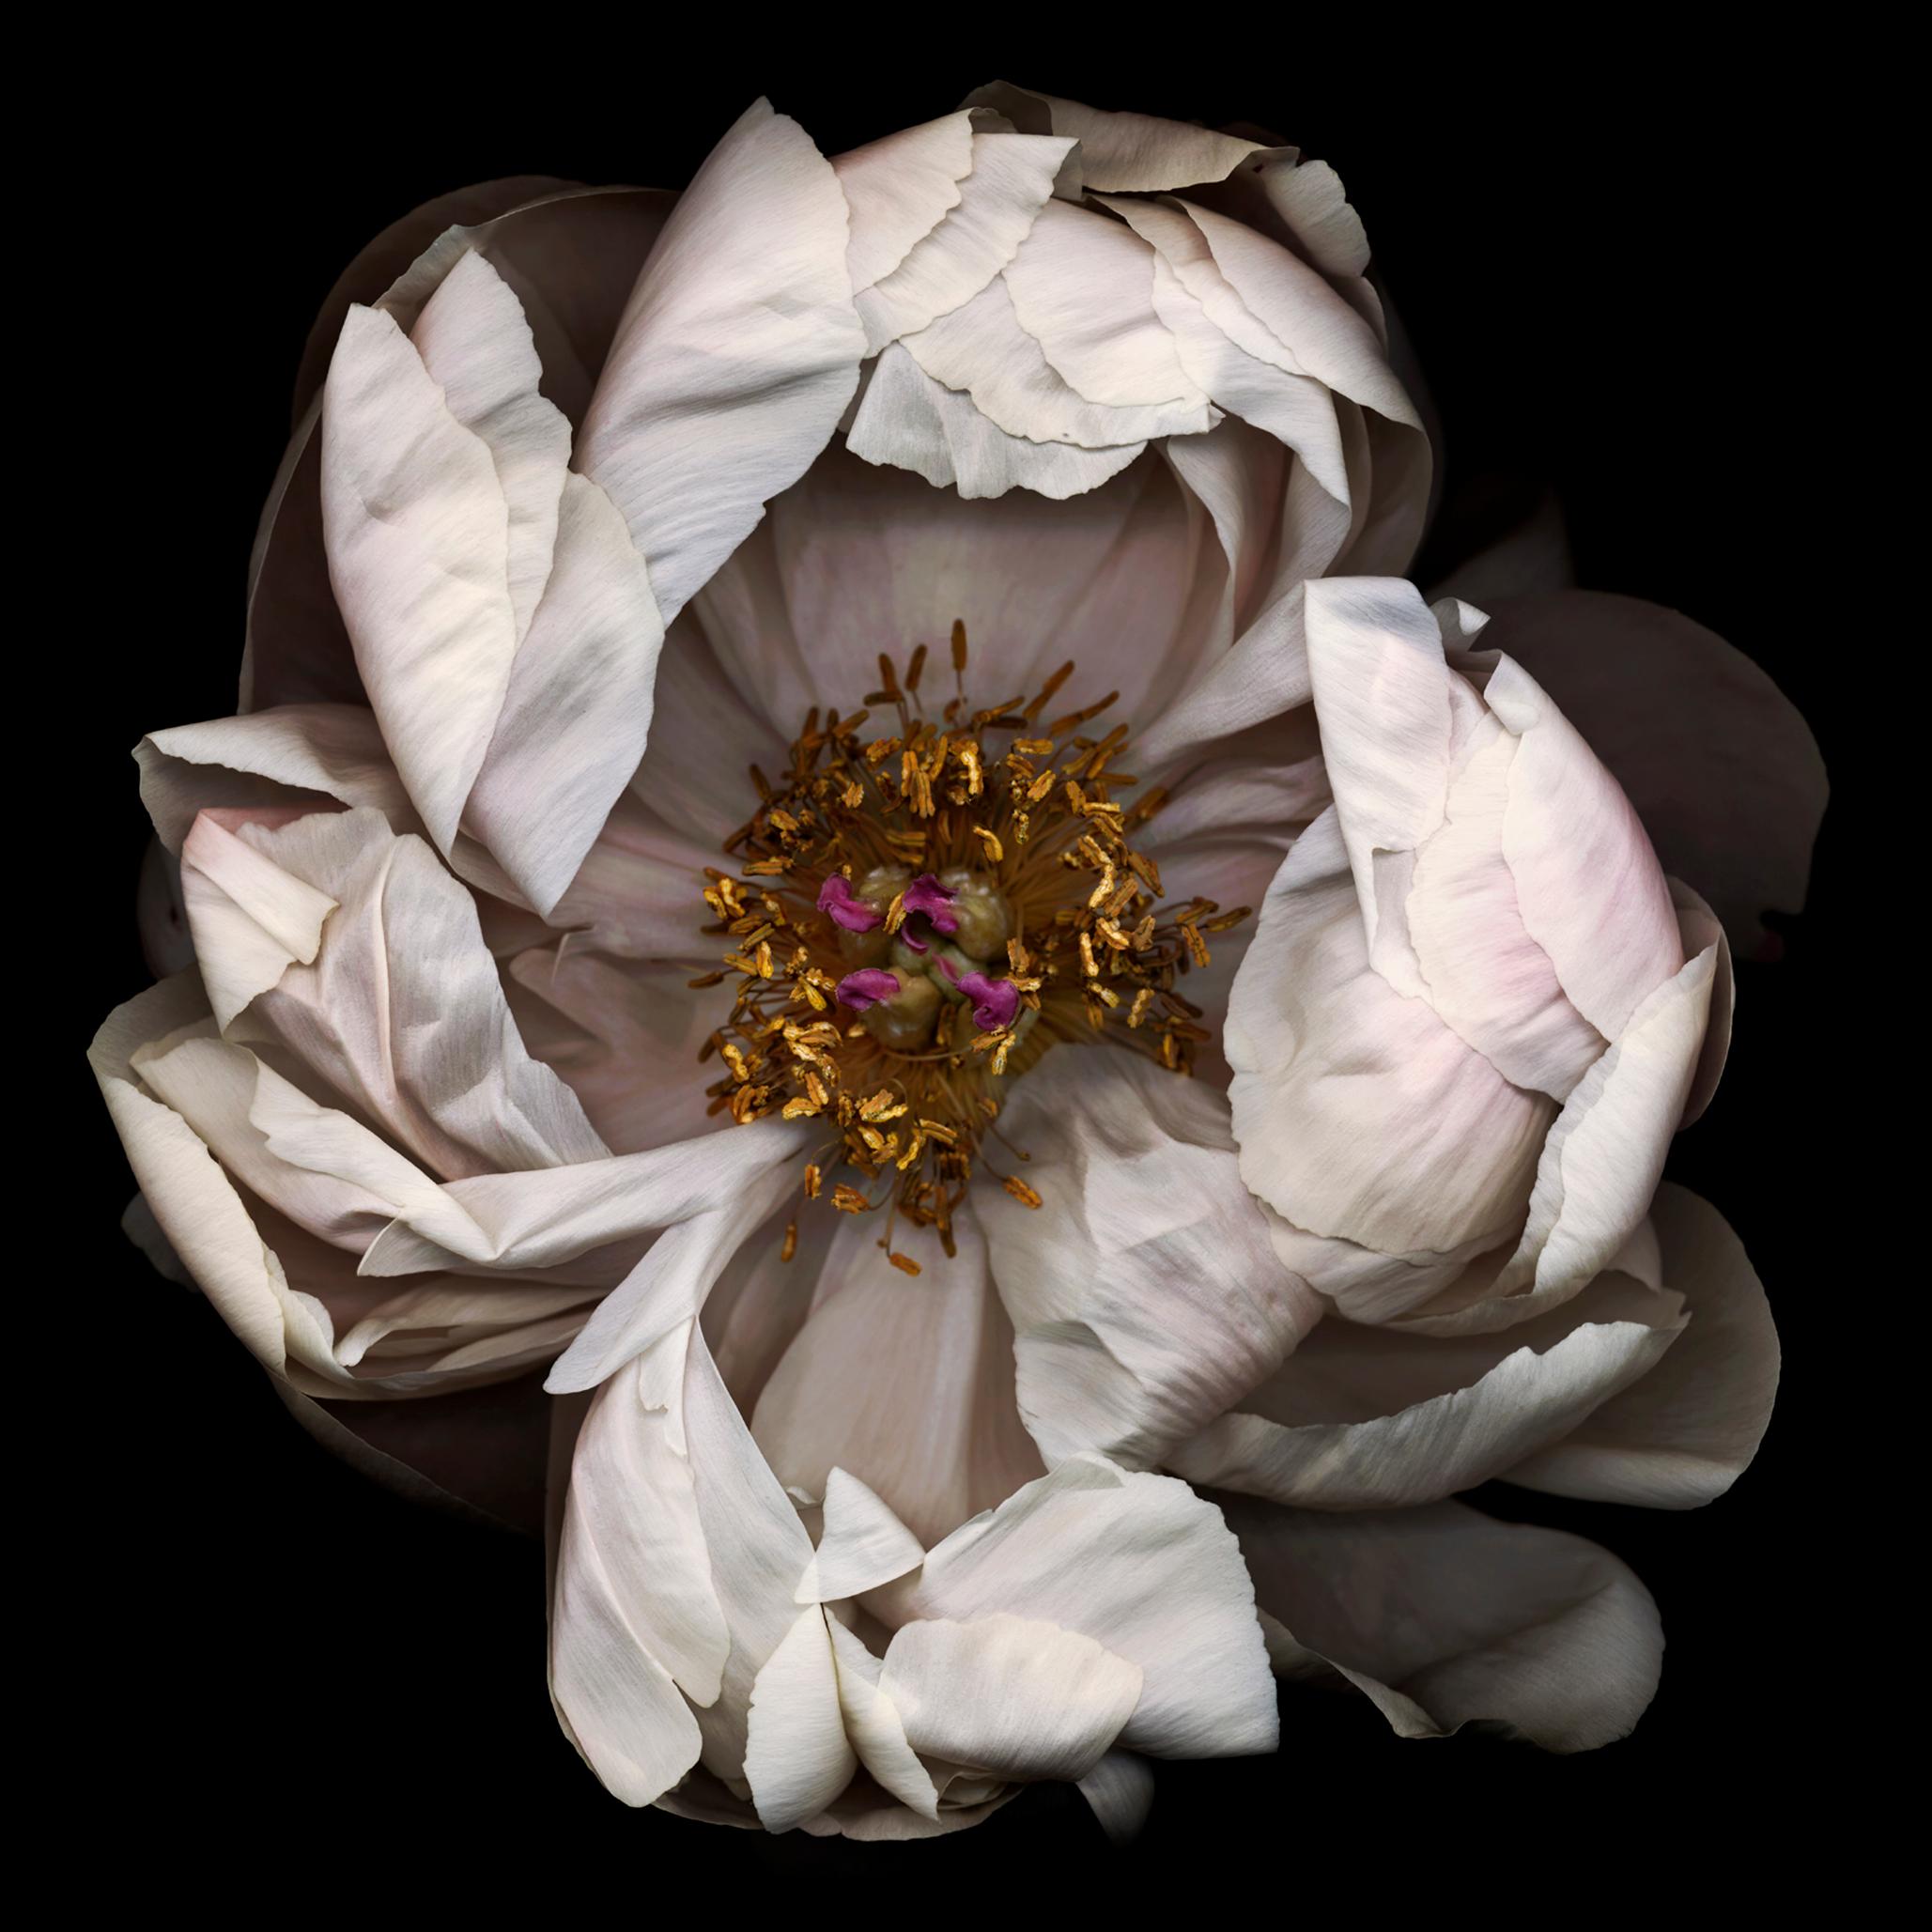 No. 13 (Framed Still Life Photograph of a White Peony Flower on Black) 